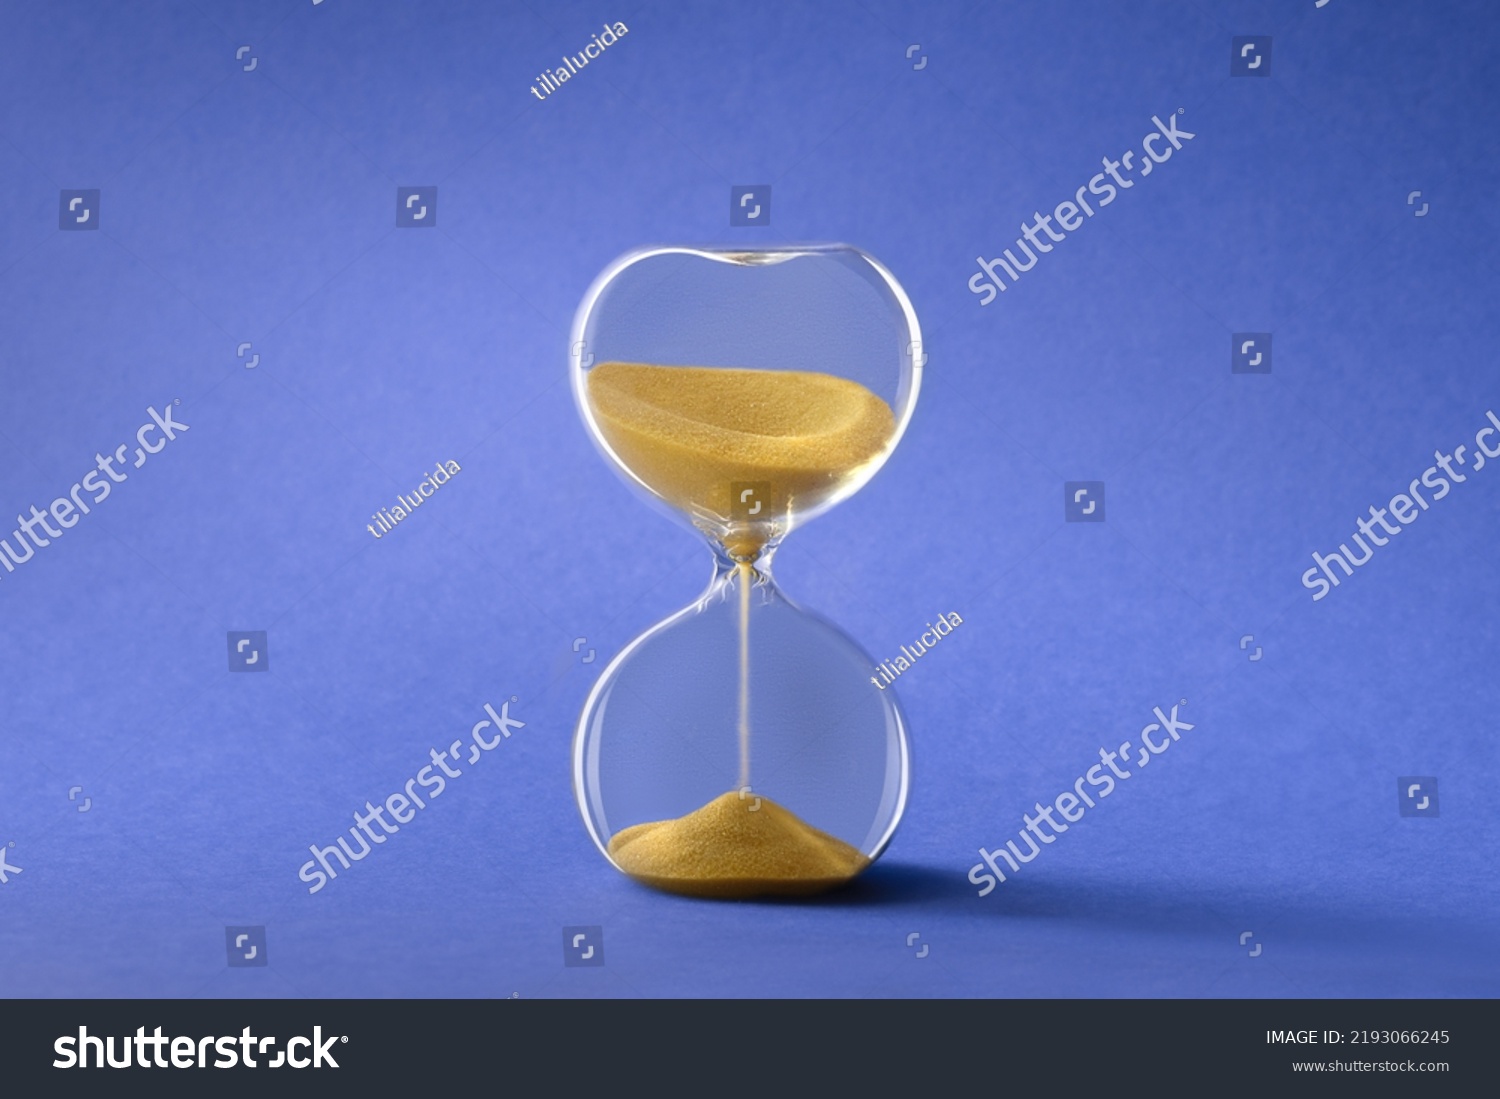 Hourglass, also known as sandglass or sand timer. Single glass sand clock with golden sand on blue paper background. Design element, #2193066245